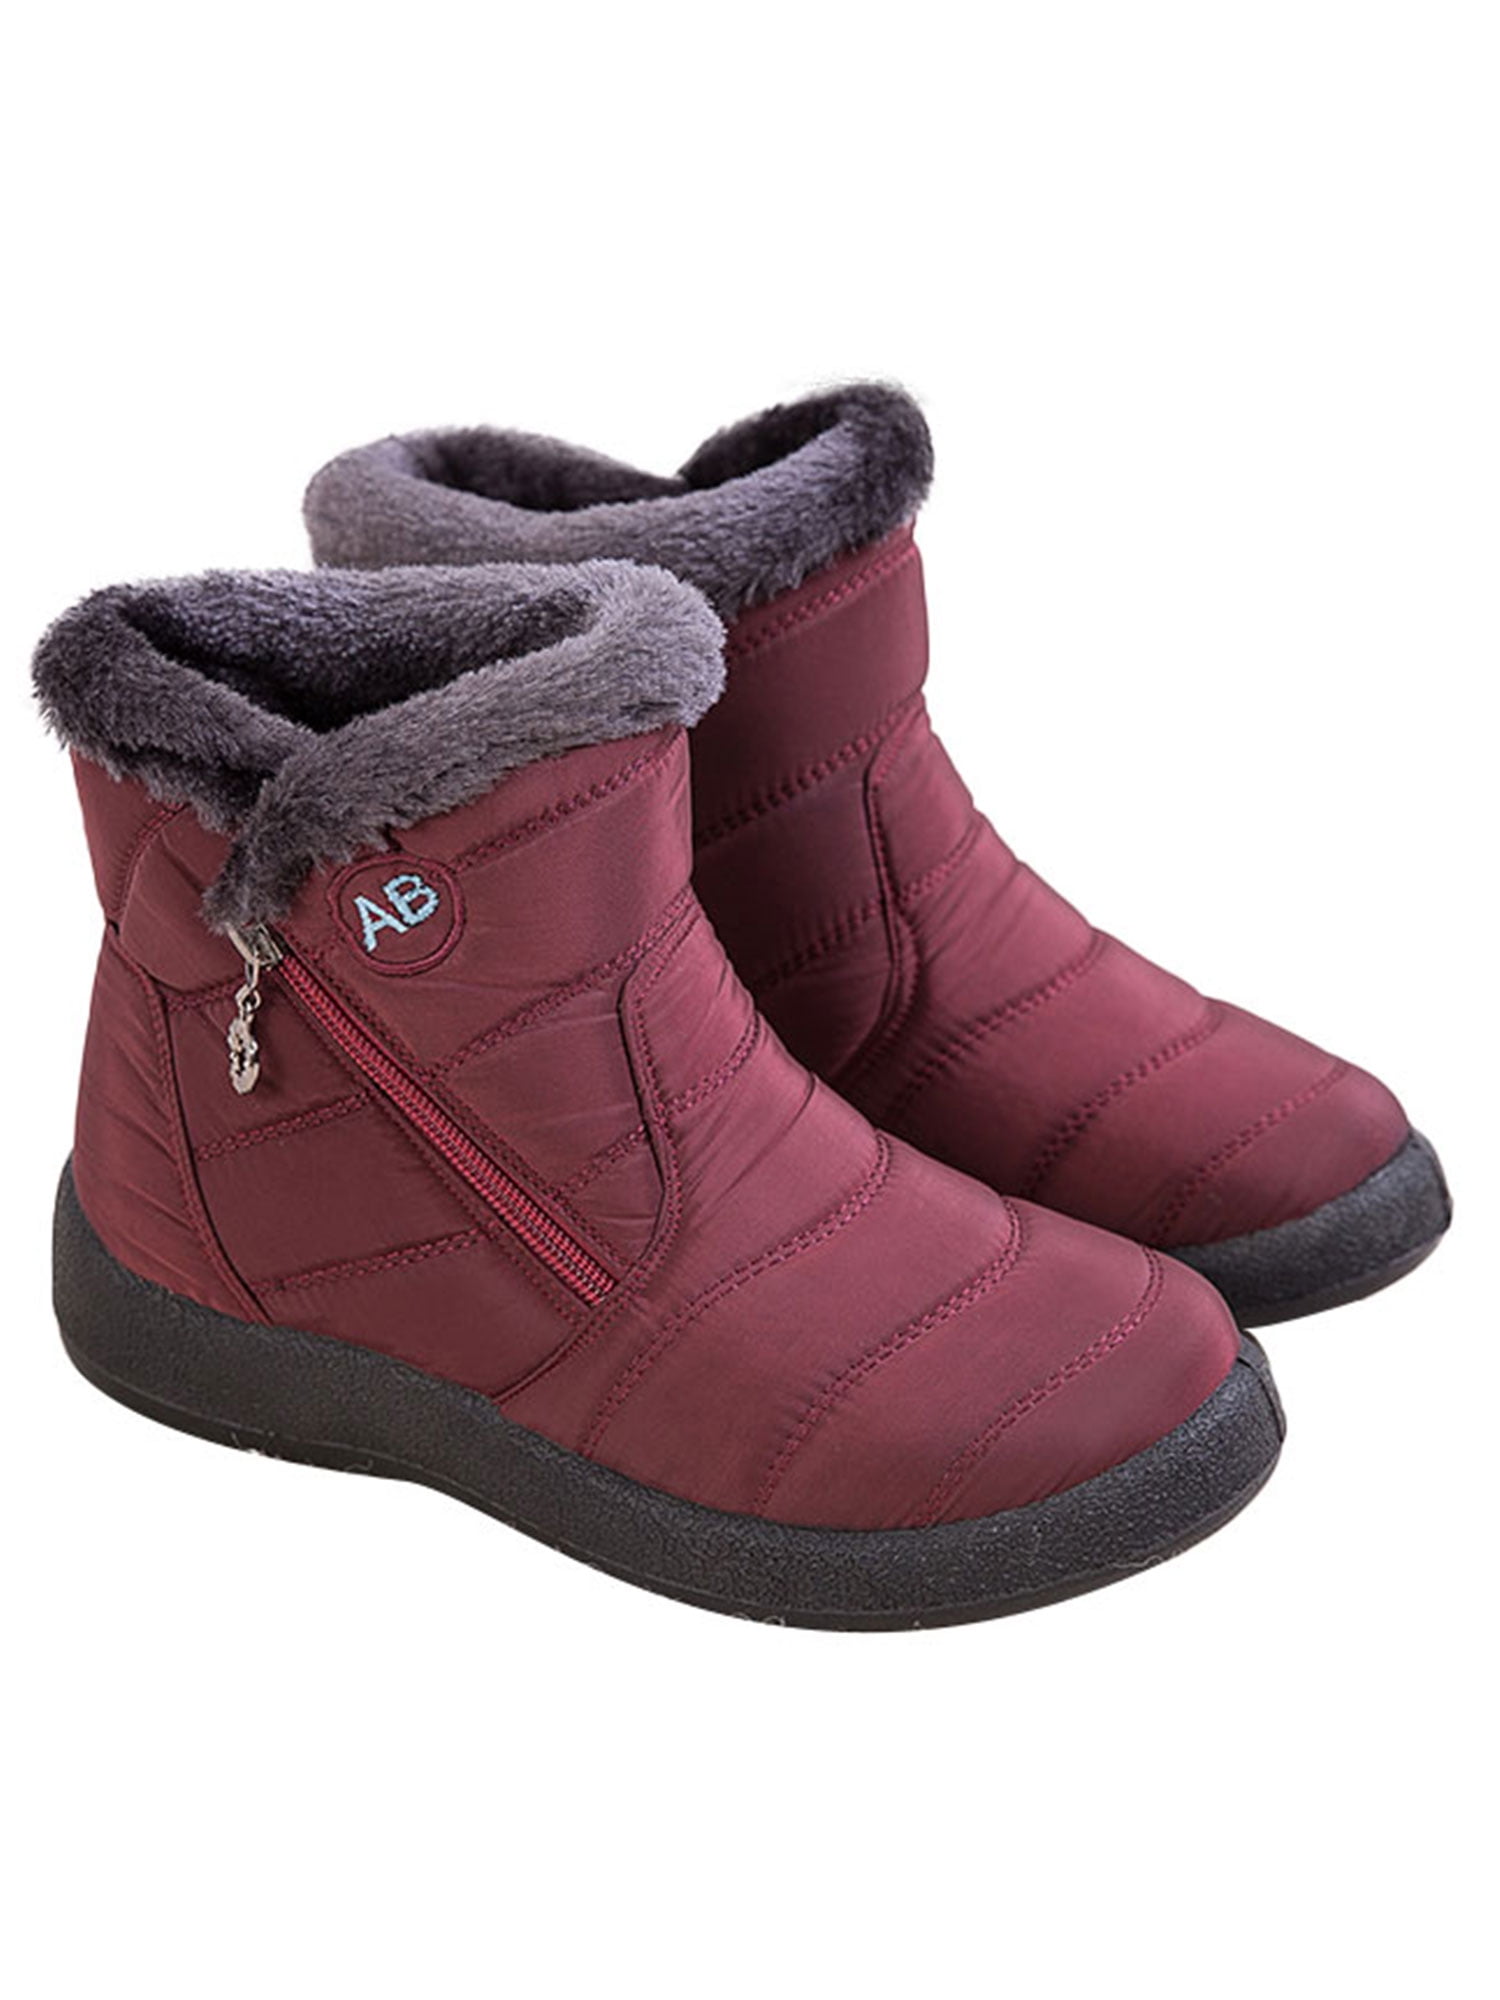 Womens Waterproof Non Slip Boots Winter Snow Fur Lined Warm Ankle Shoes Size